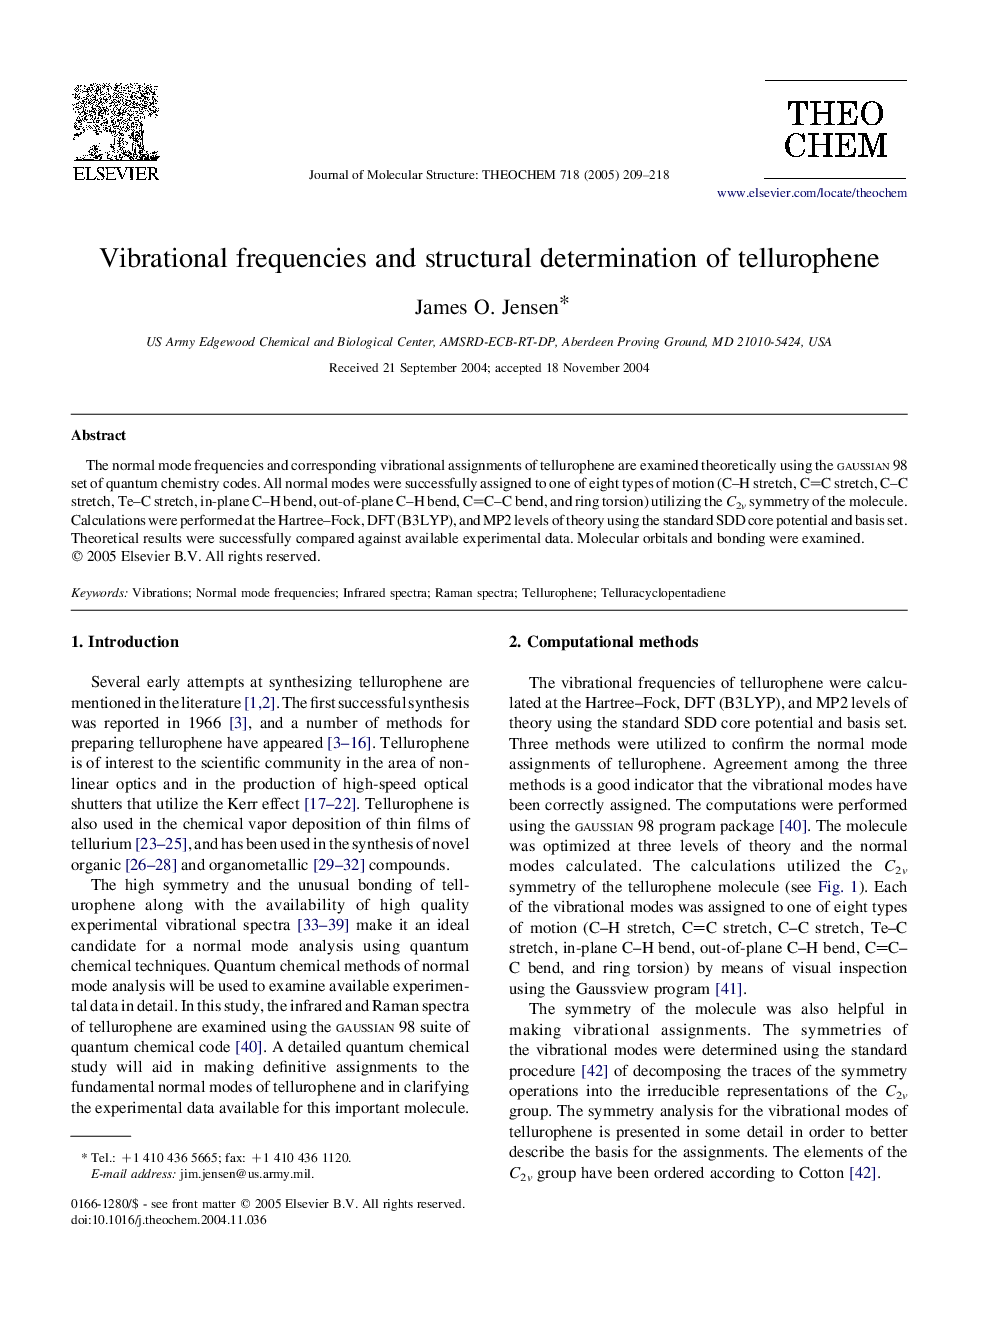 Vibrational frequencies and structural determination of tellurophene